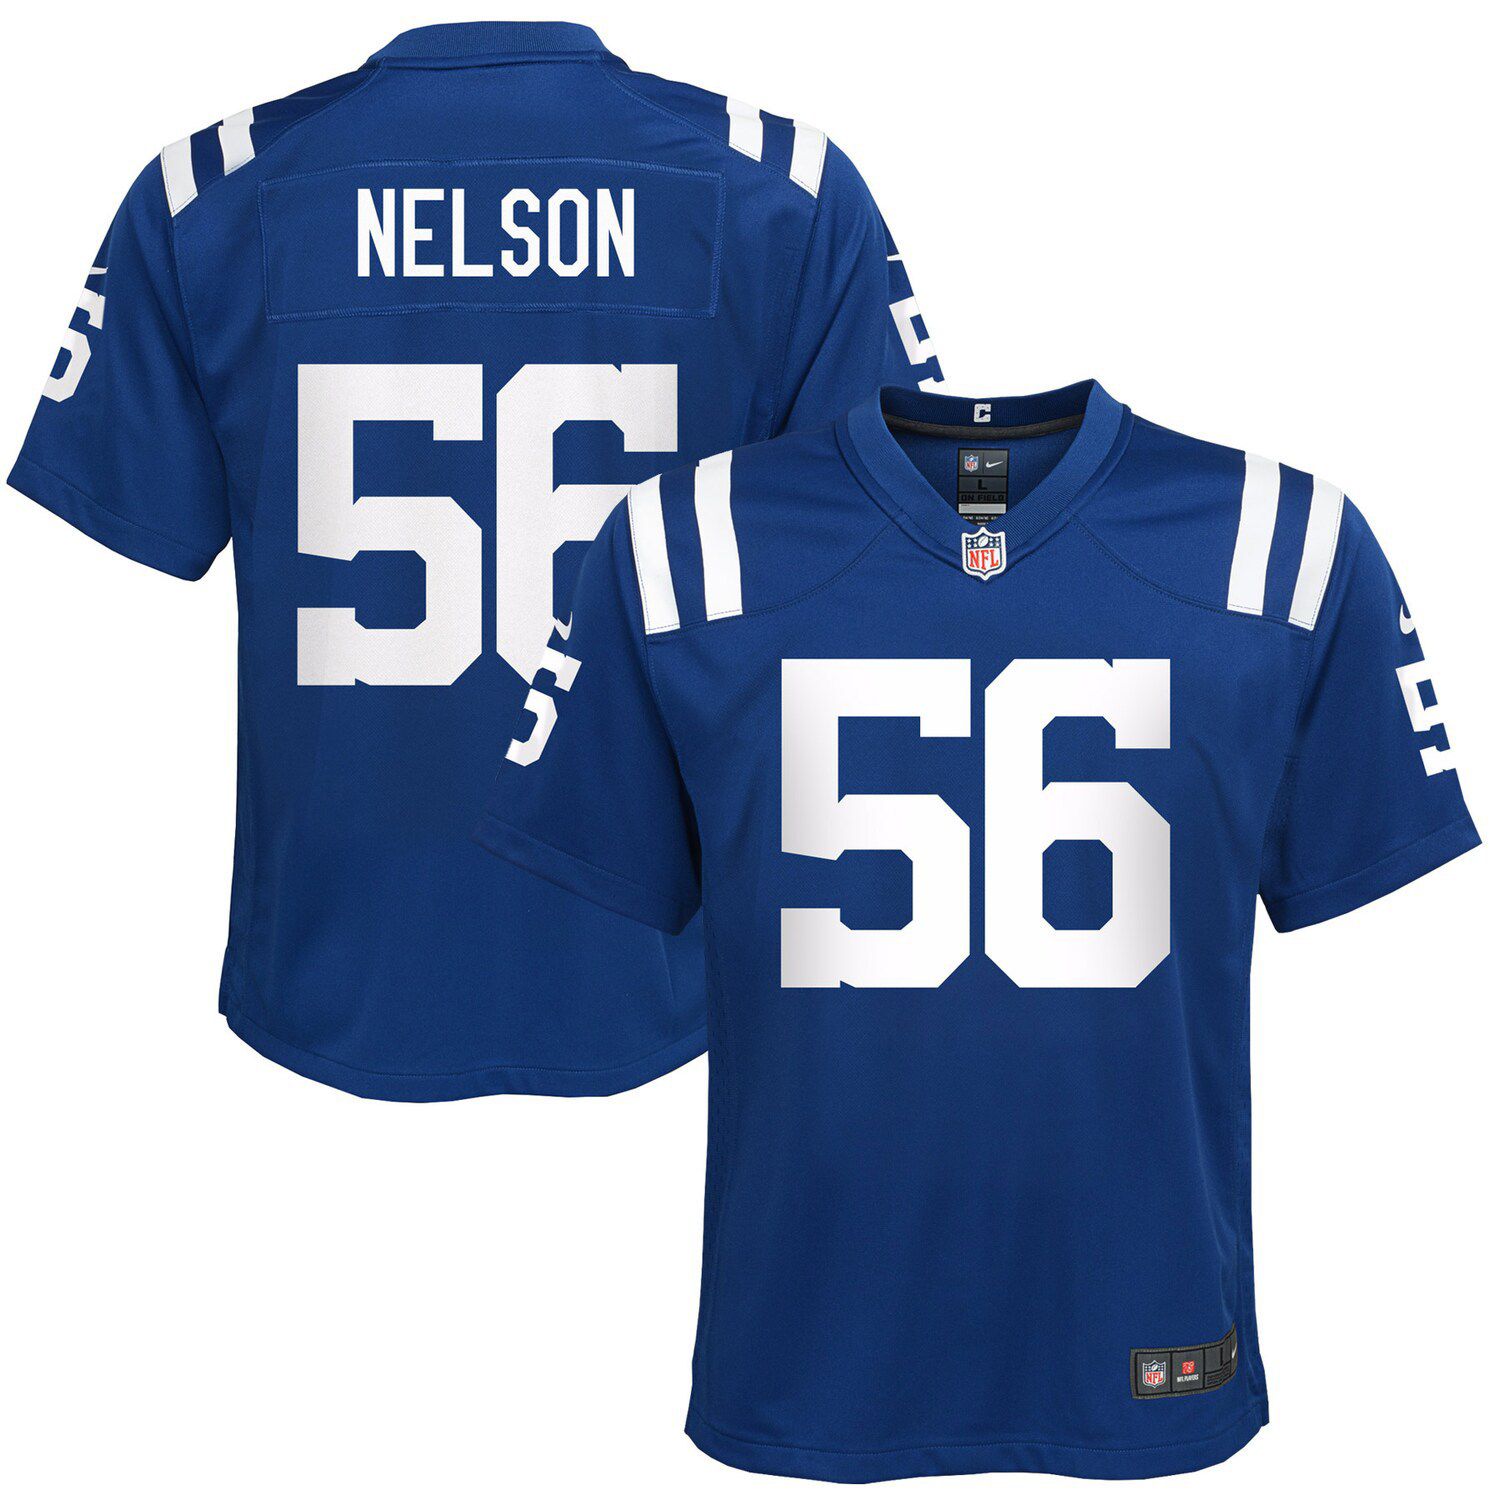 colts nelson jersey